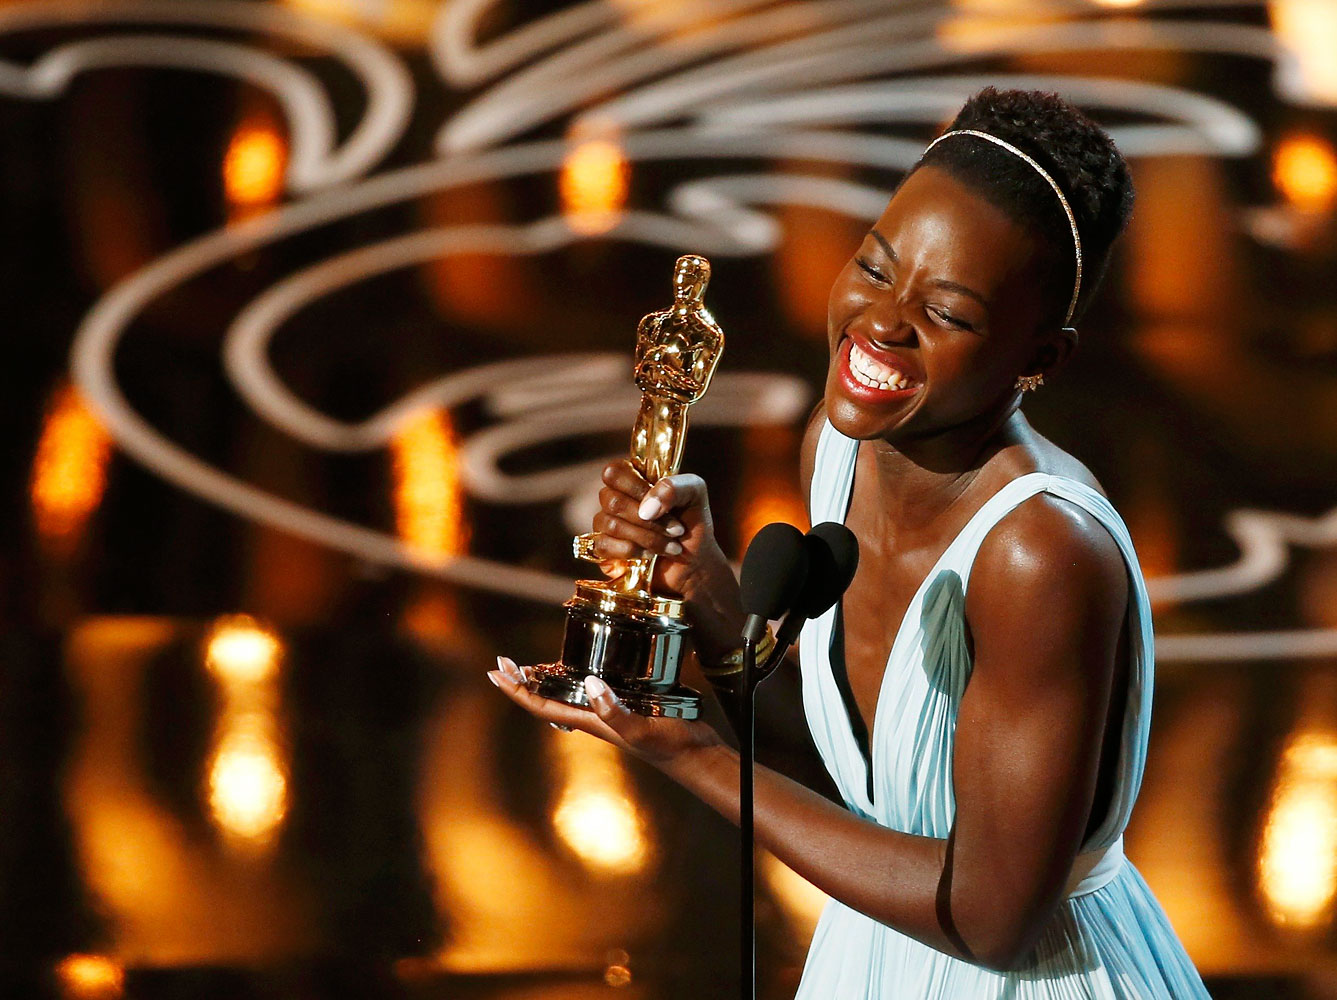 Lupita Nyong'o, best supporting actress winner for her role in "12 Years a Slave", speaks on stage at the 86th Academy Awards in Hollywood, California March 2, 2014. (Lucy Nicholson—Reuters)